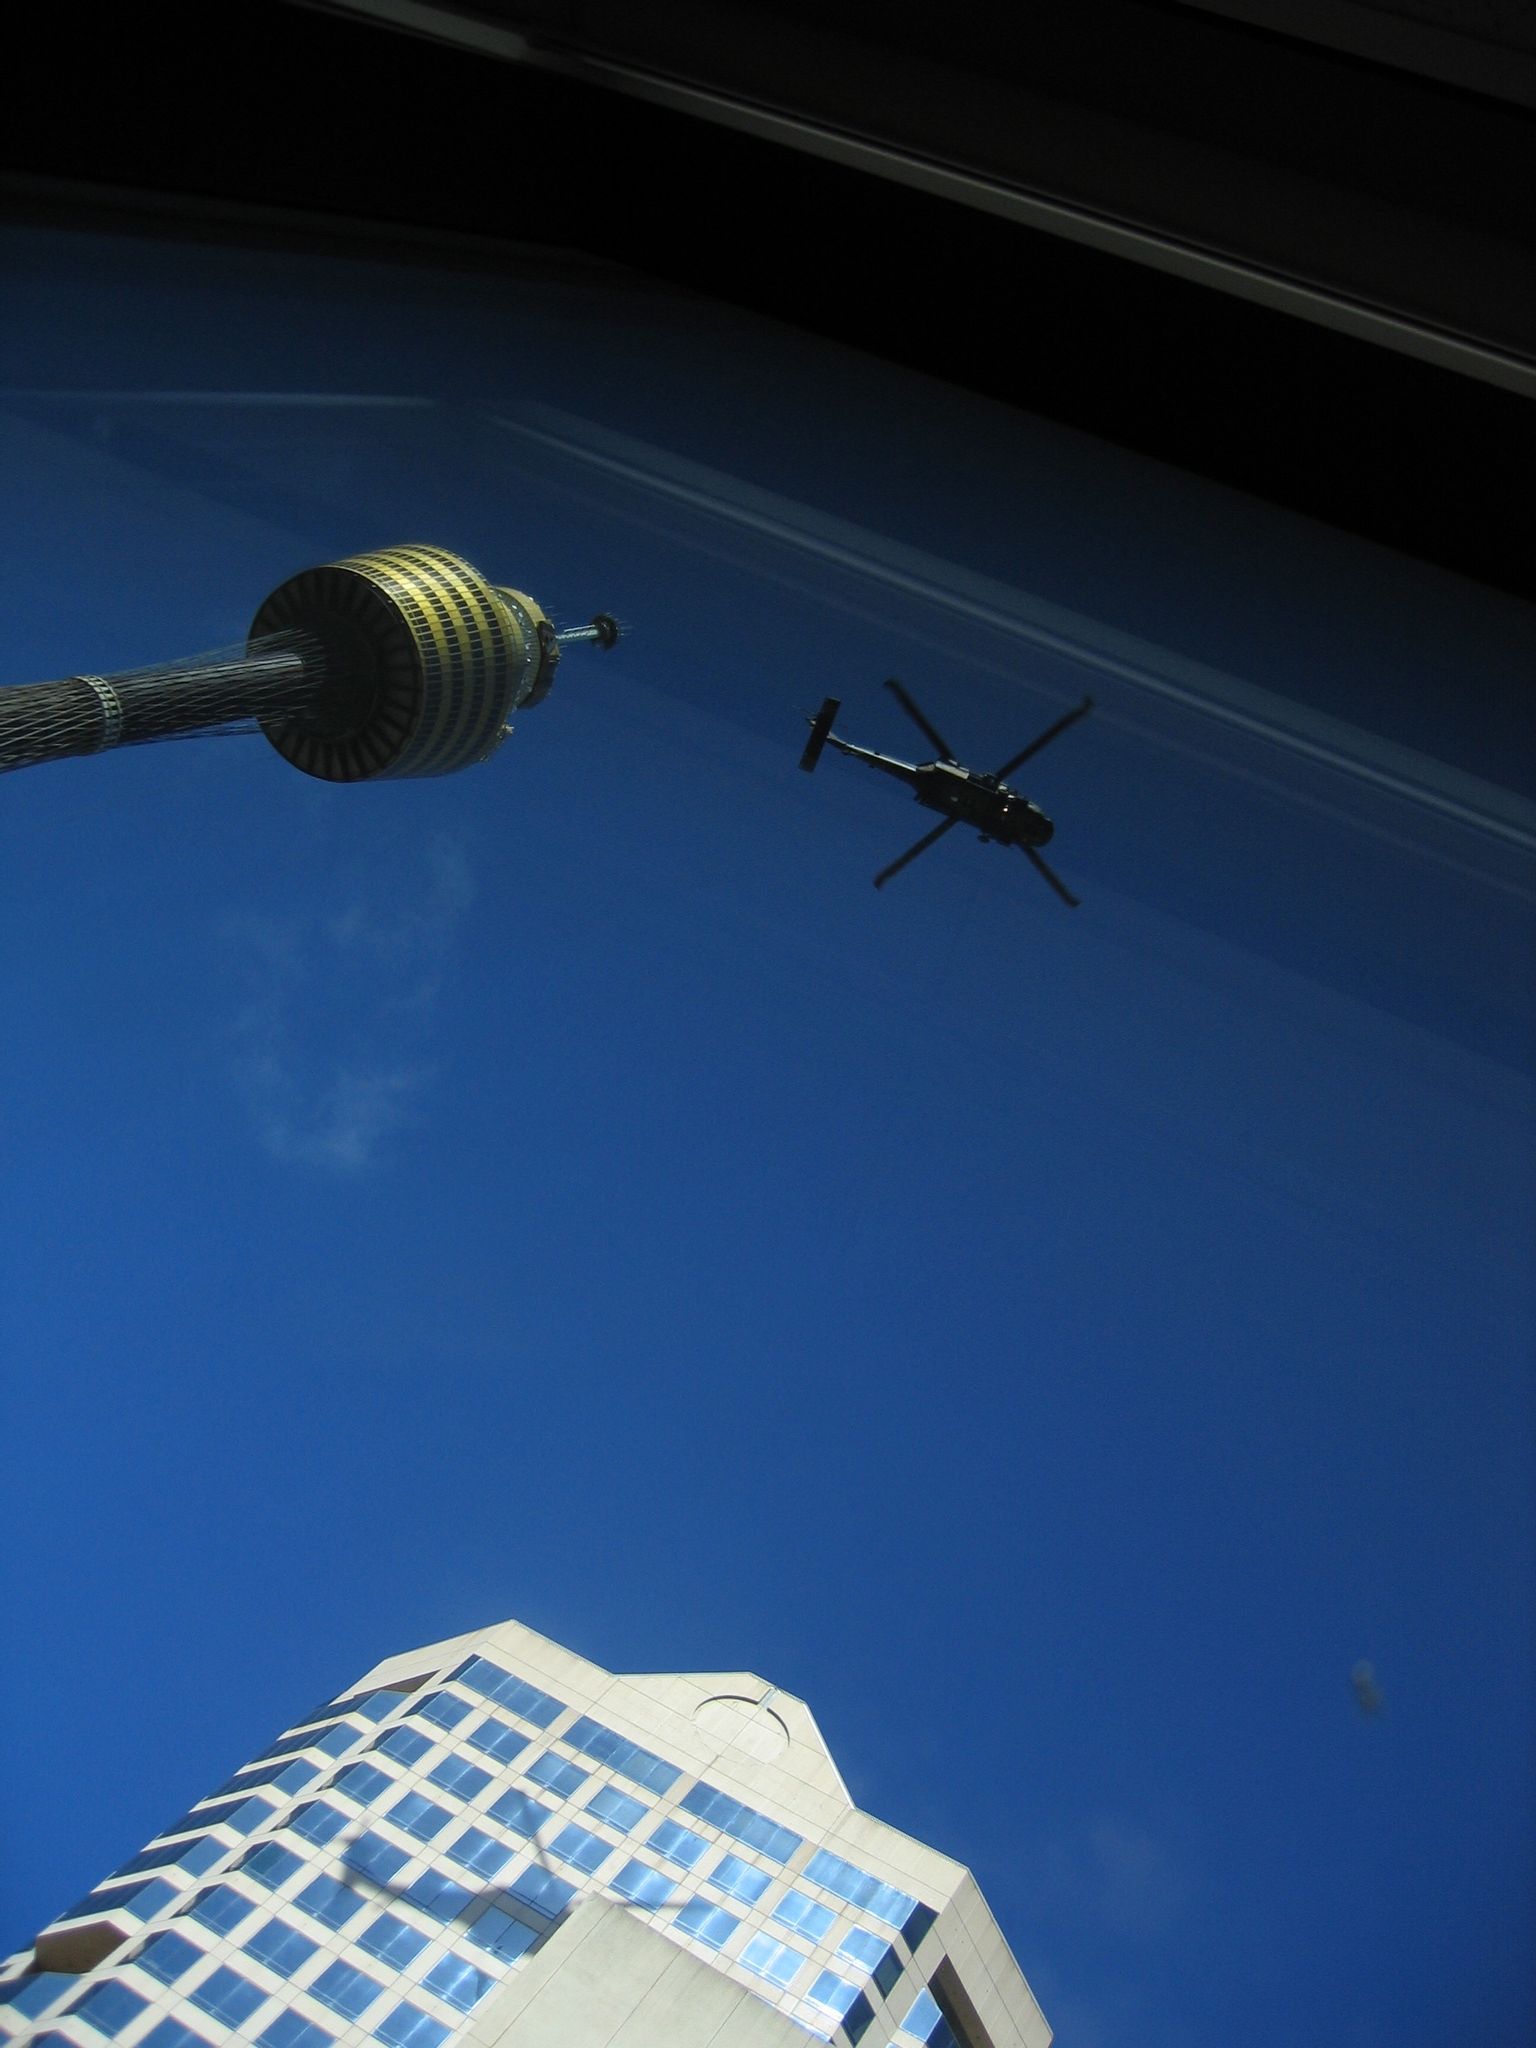 A photo taking from as close to the window as possible looking directly upwards, with a Blackhawk helicopter almost directly above, and Centrepoint Tower visible at the left.